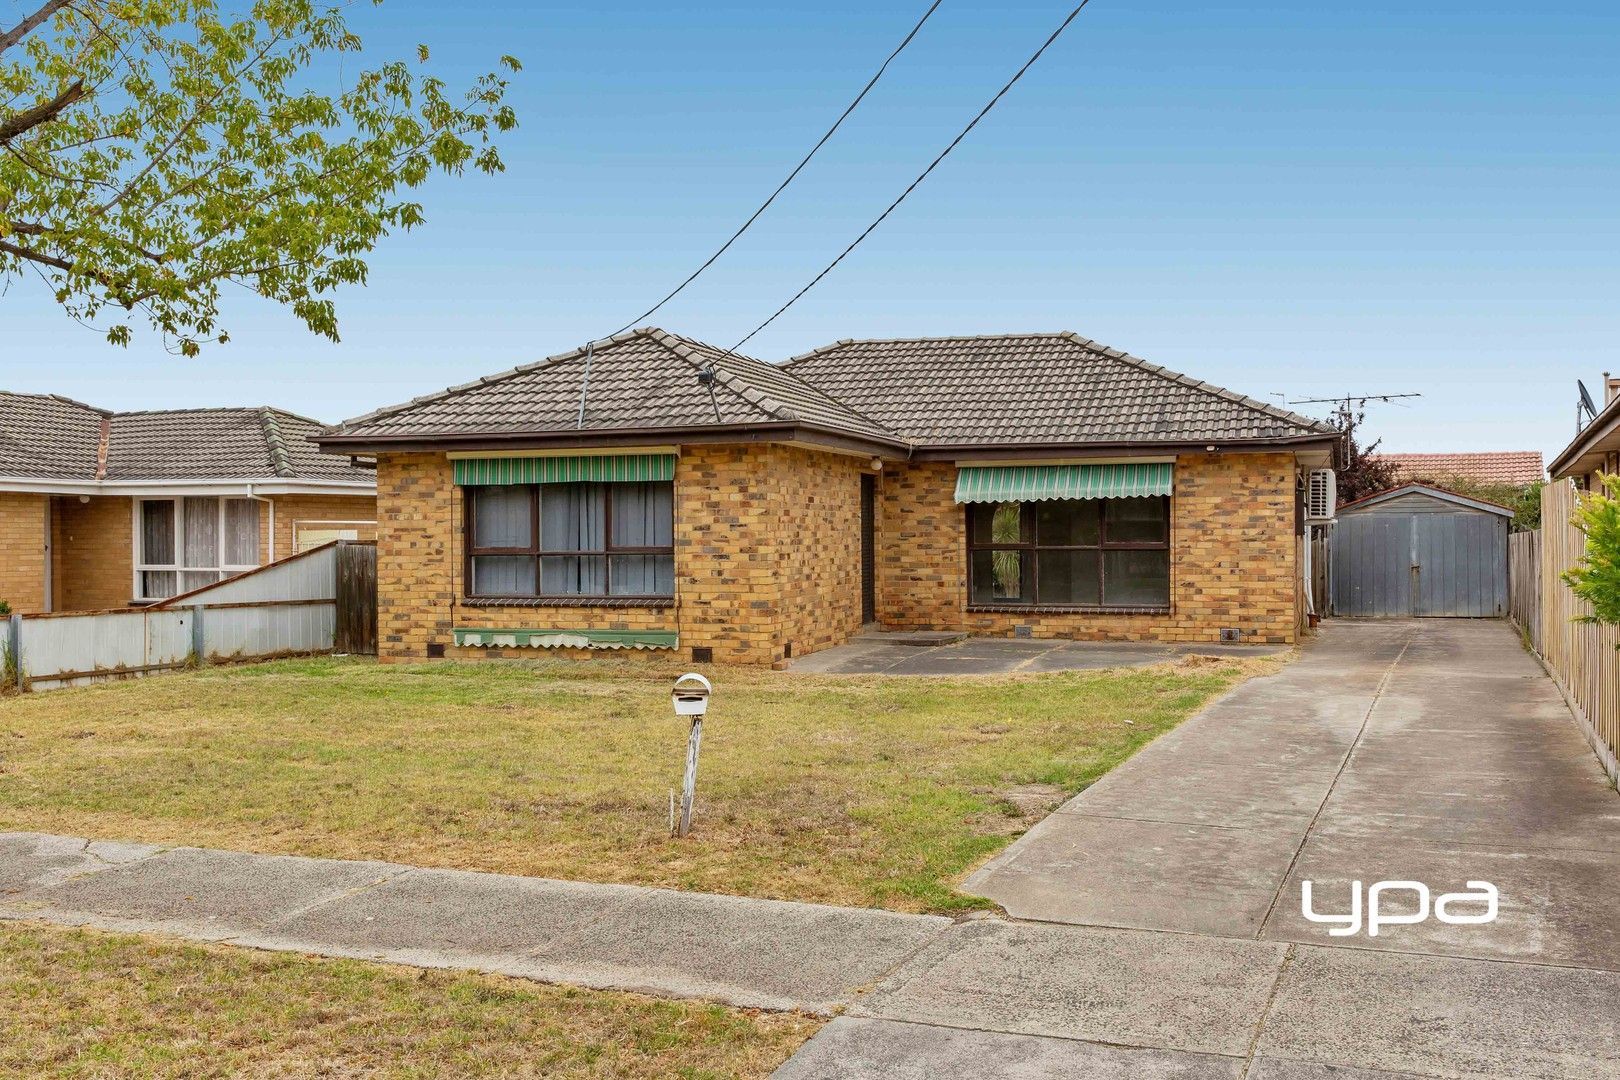 3 bedrooms House in 29 Oulton Street FAWKNER VIC, 3060